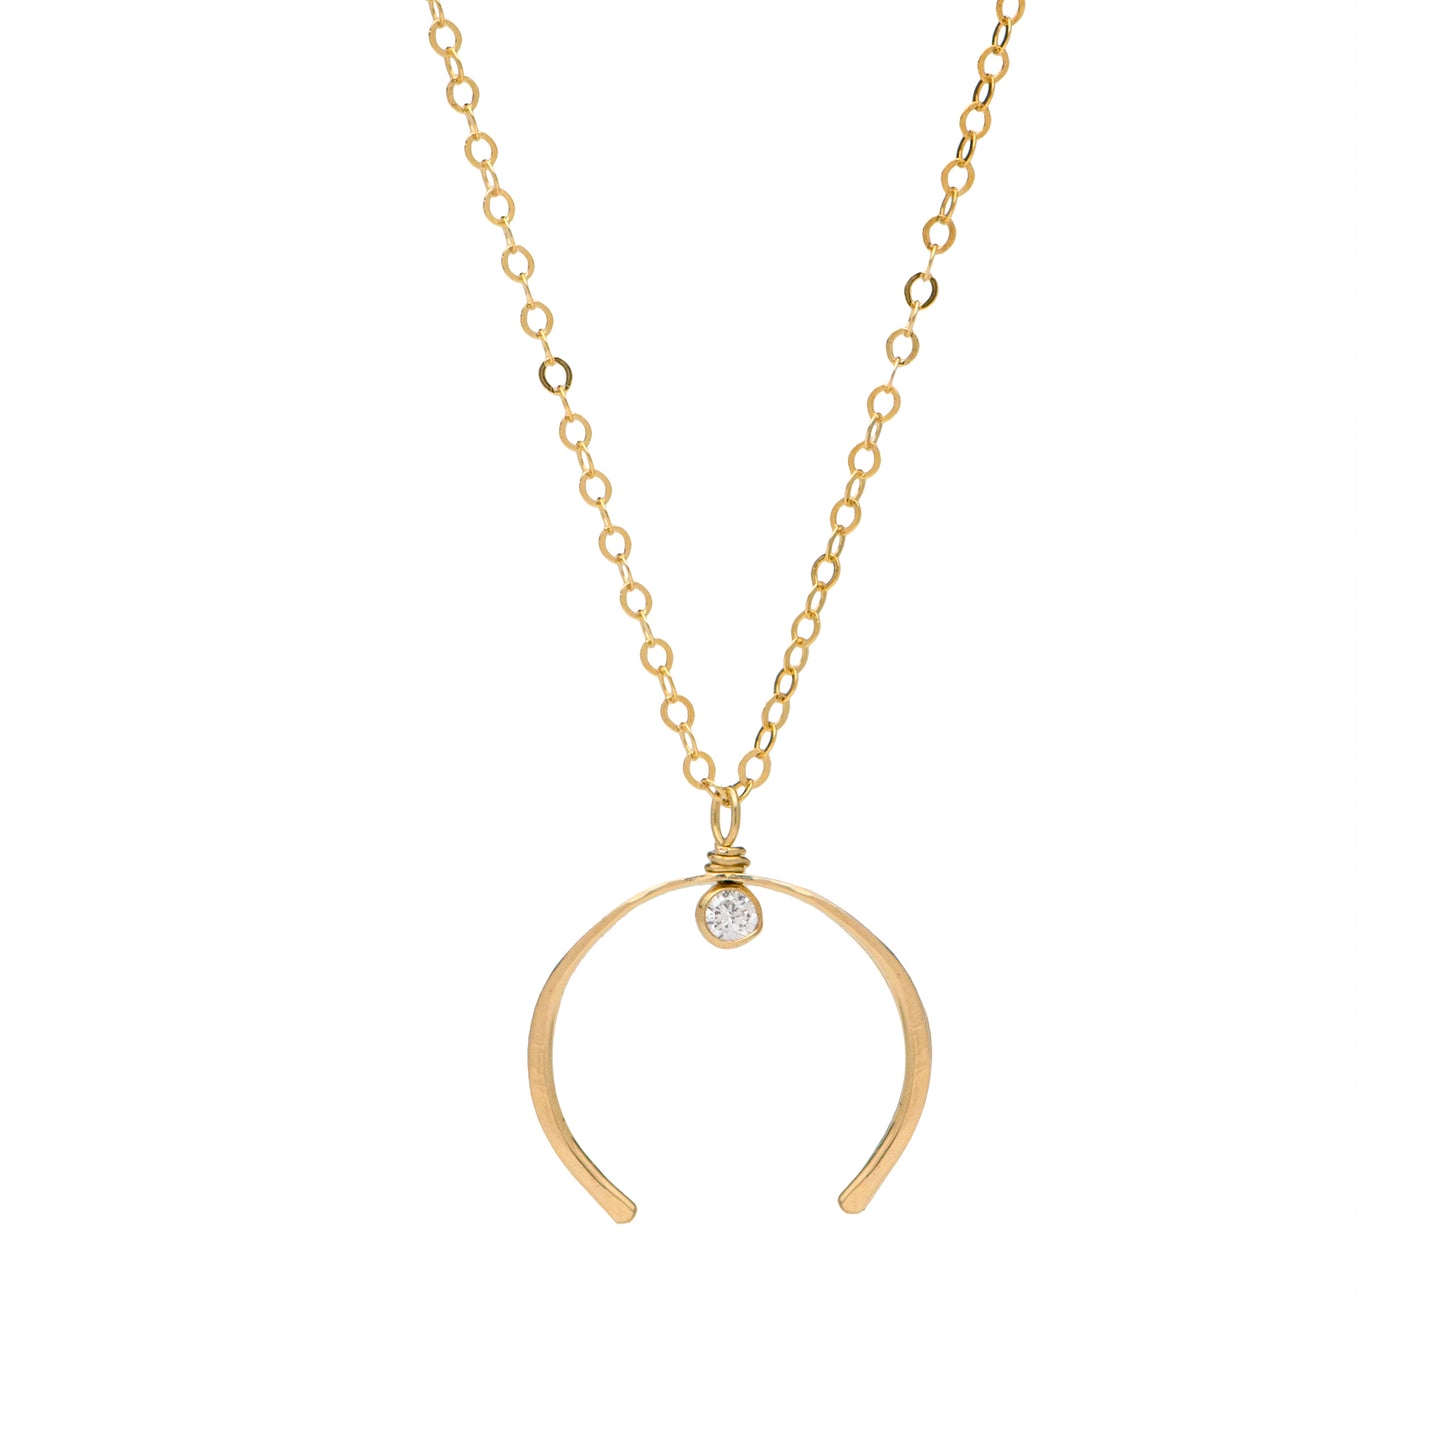 Crescent Moon Gold Necklace with Cubic Zirconia